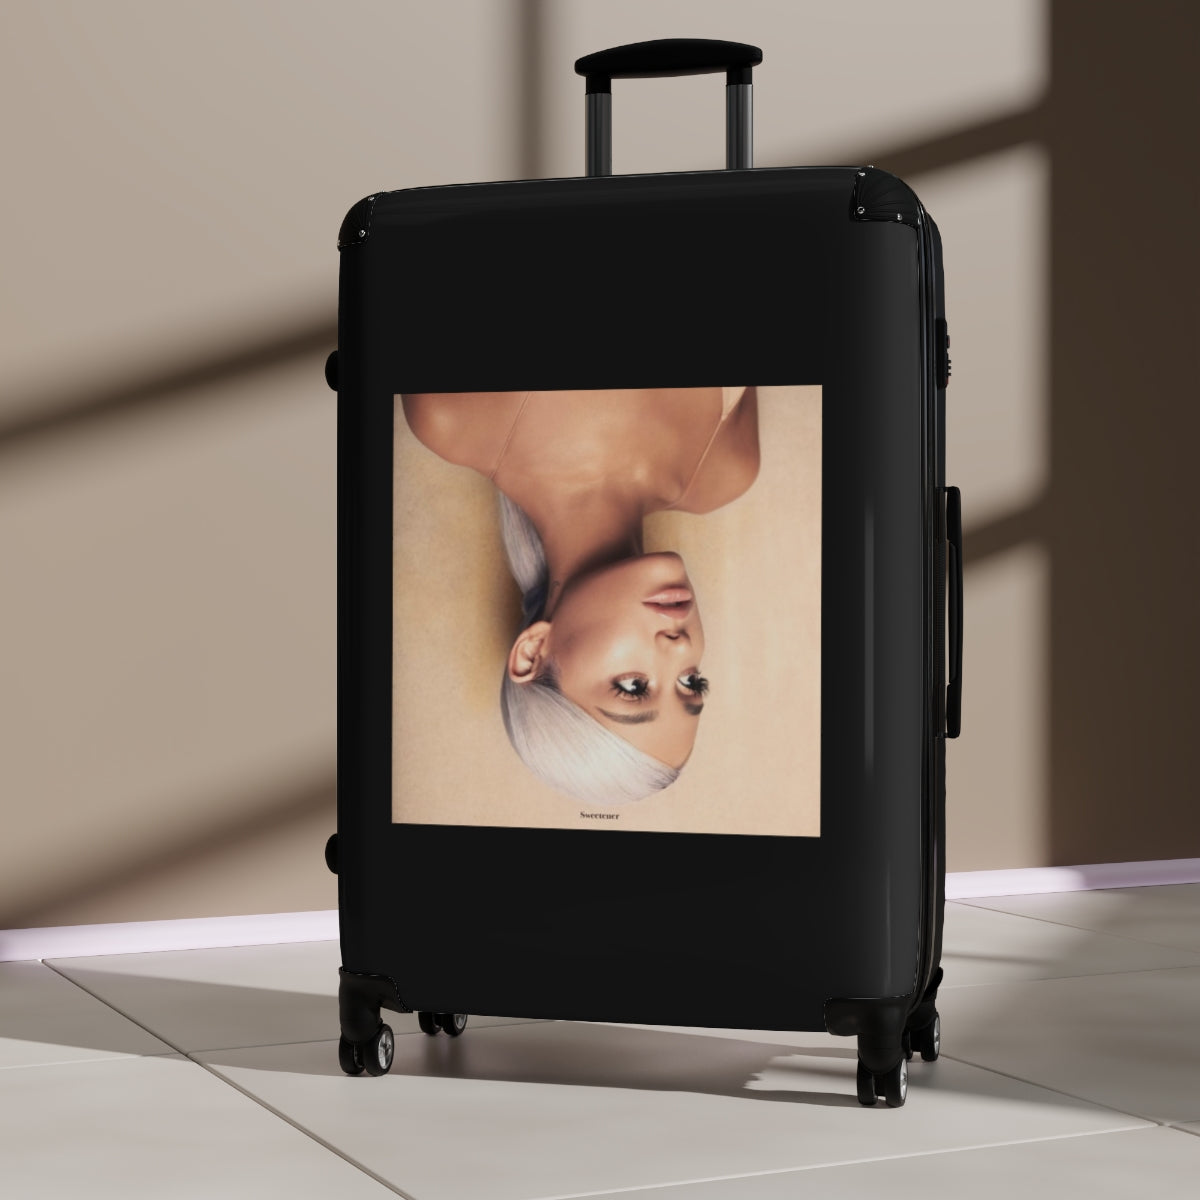 Getrott Ariana Grande Sweetener 2018 Black Cabin Suitcase Inner Pockets Extended Storage Adjustable Telescopic Handle Inner Pockets Double wheeled Polycarbonate Hard-shell Built-in Lock